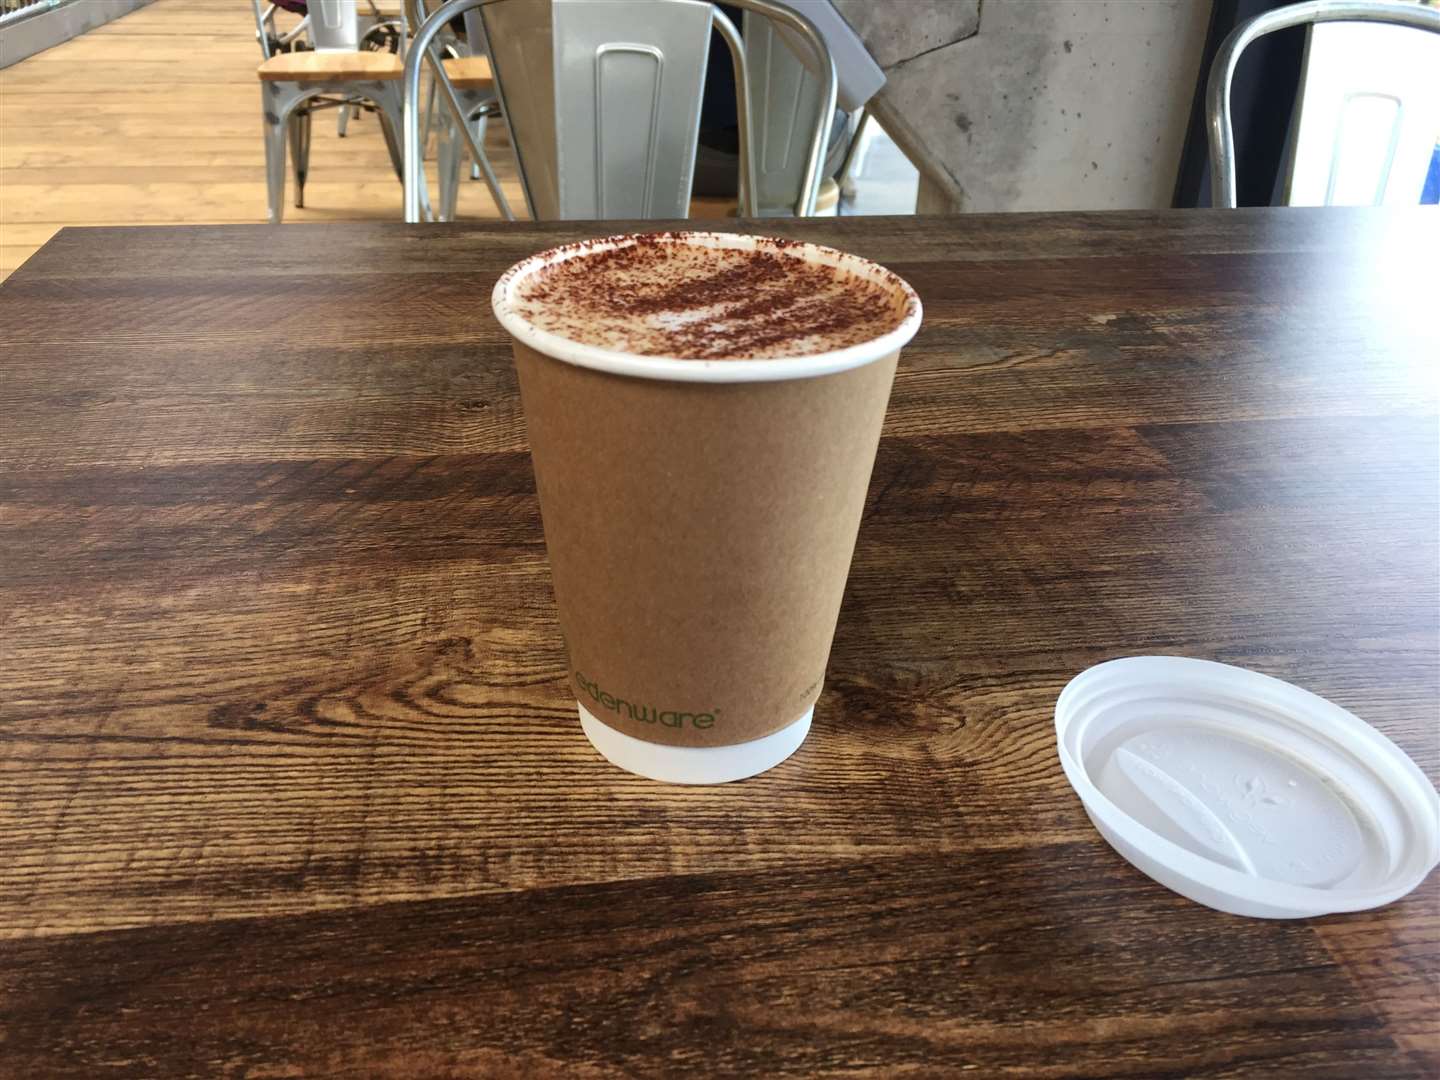 My cappuccino from HatHats